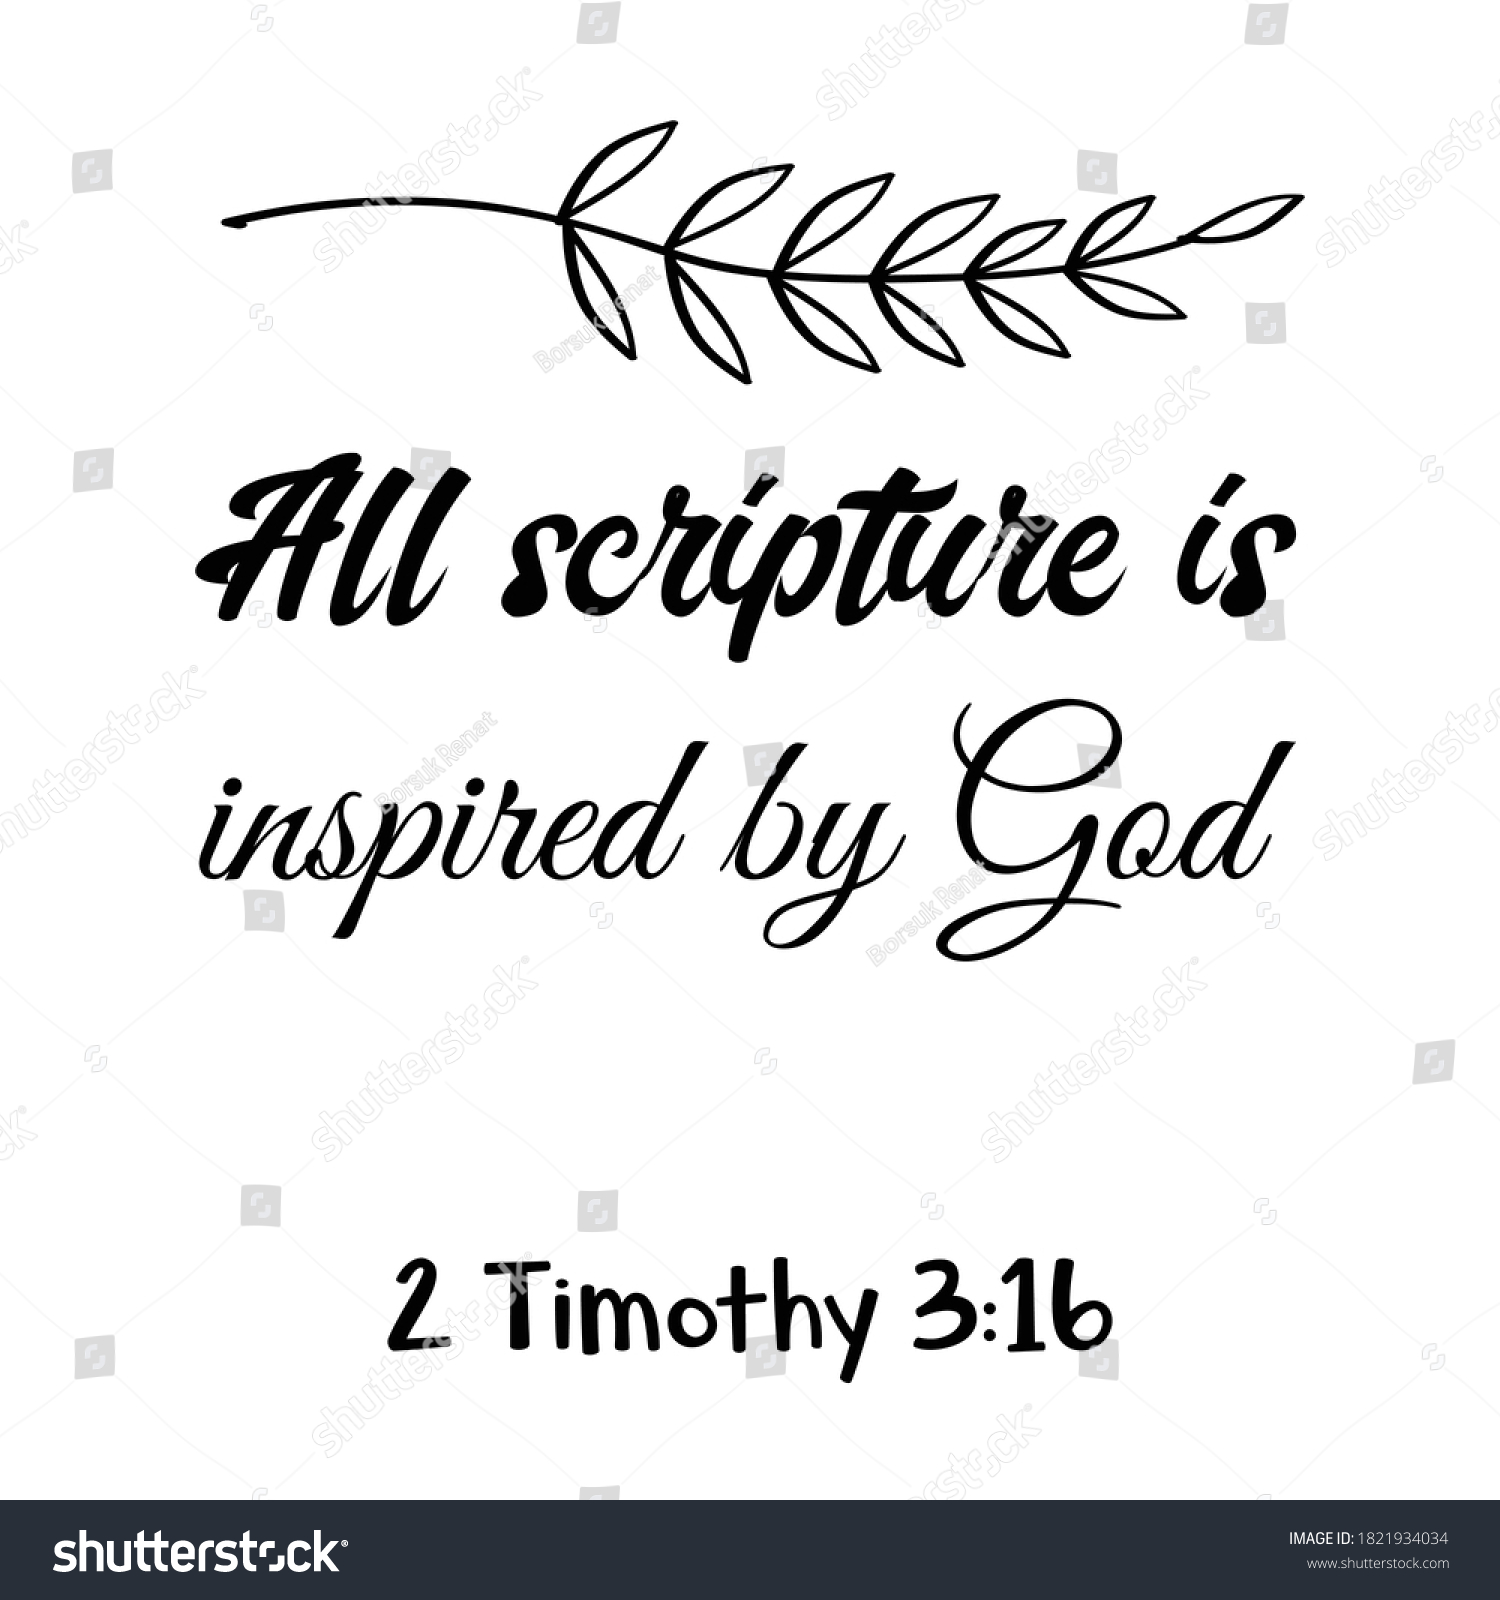 All Scripture Inspired By God Bible Stock Vector (Royalty Free ...